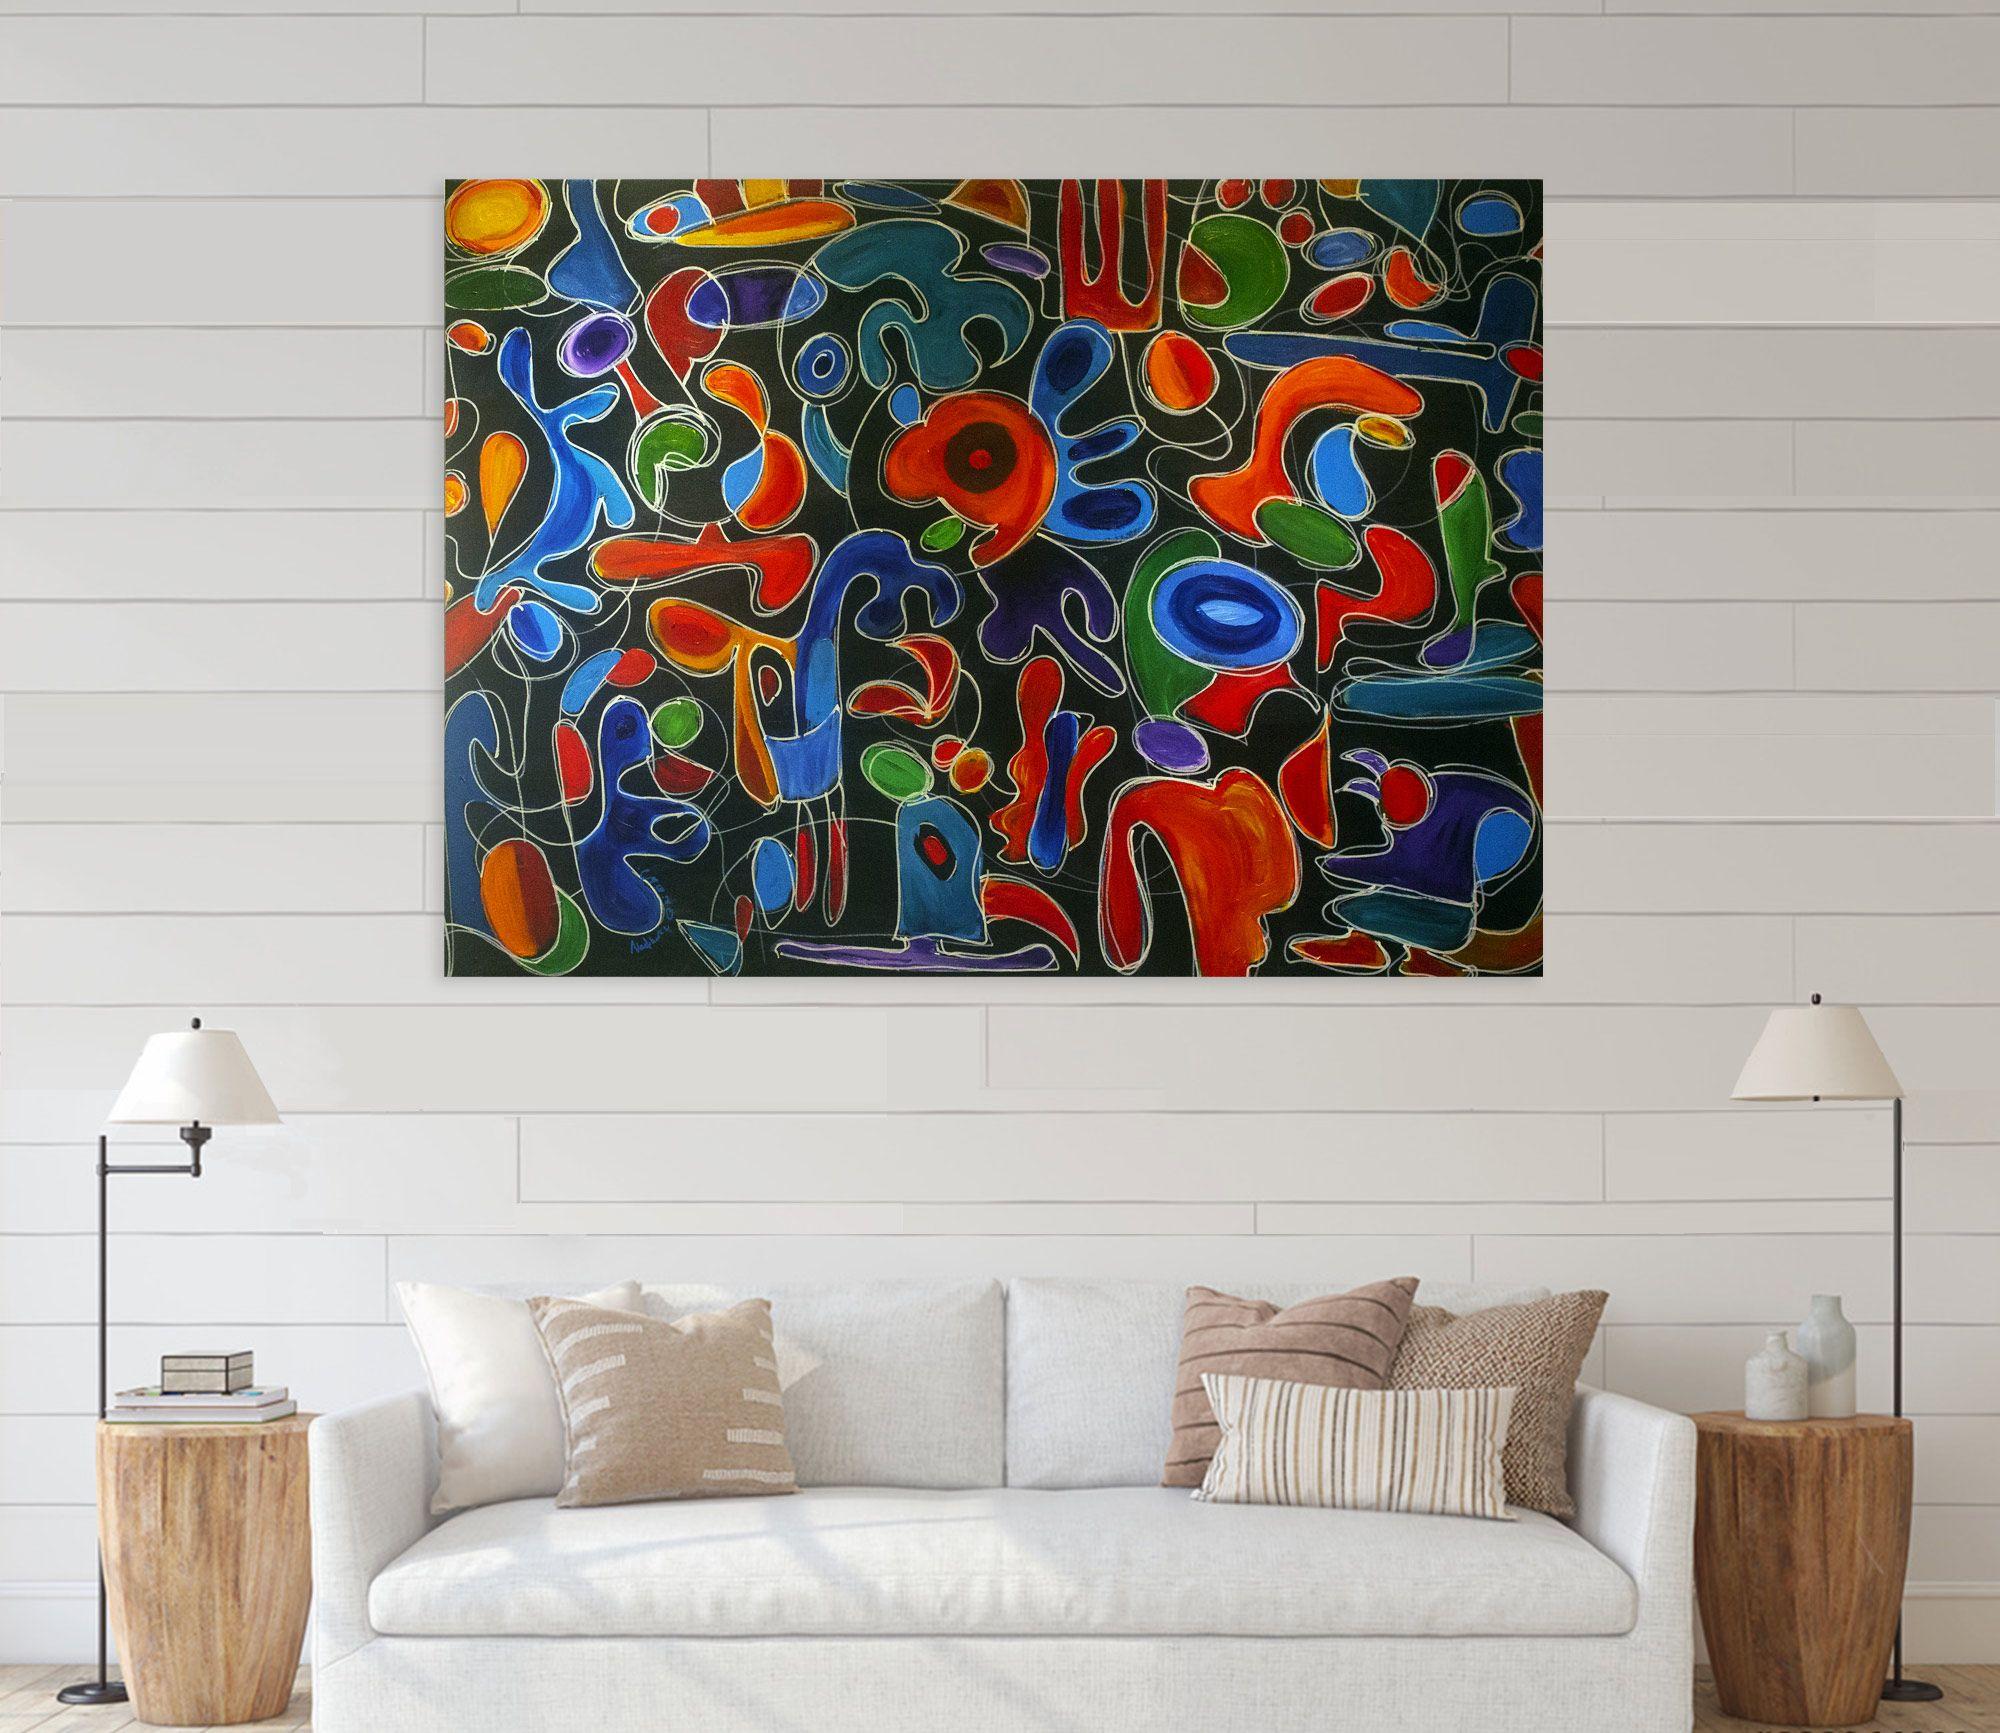 Enchanted Music, Painting, Acrylic on Canvas - Black Abstract Painting by Nathalie Gribinski